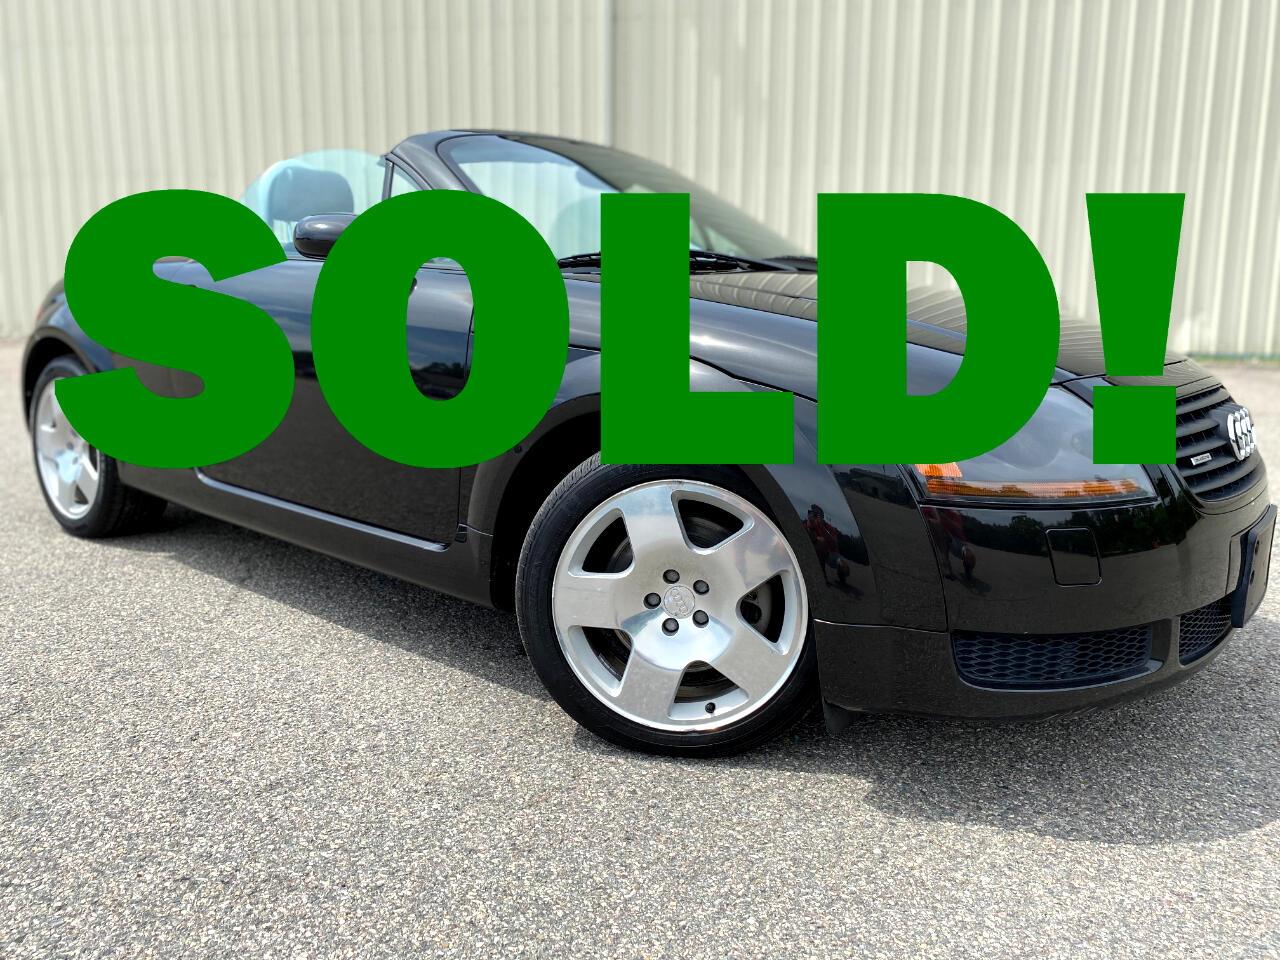 Used 2001 Audi Tt Roadster Quattro For Sale In Rockland Ma 02370